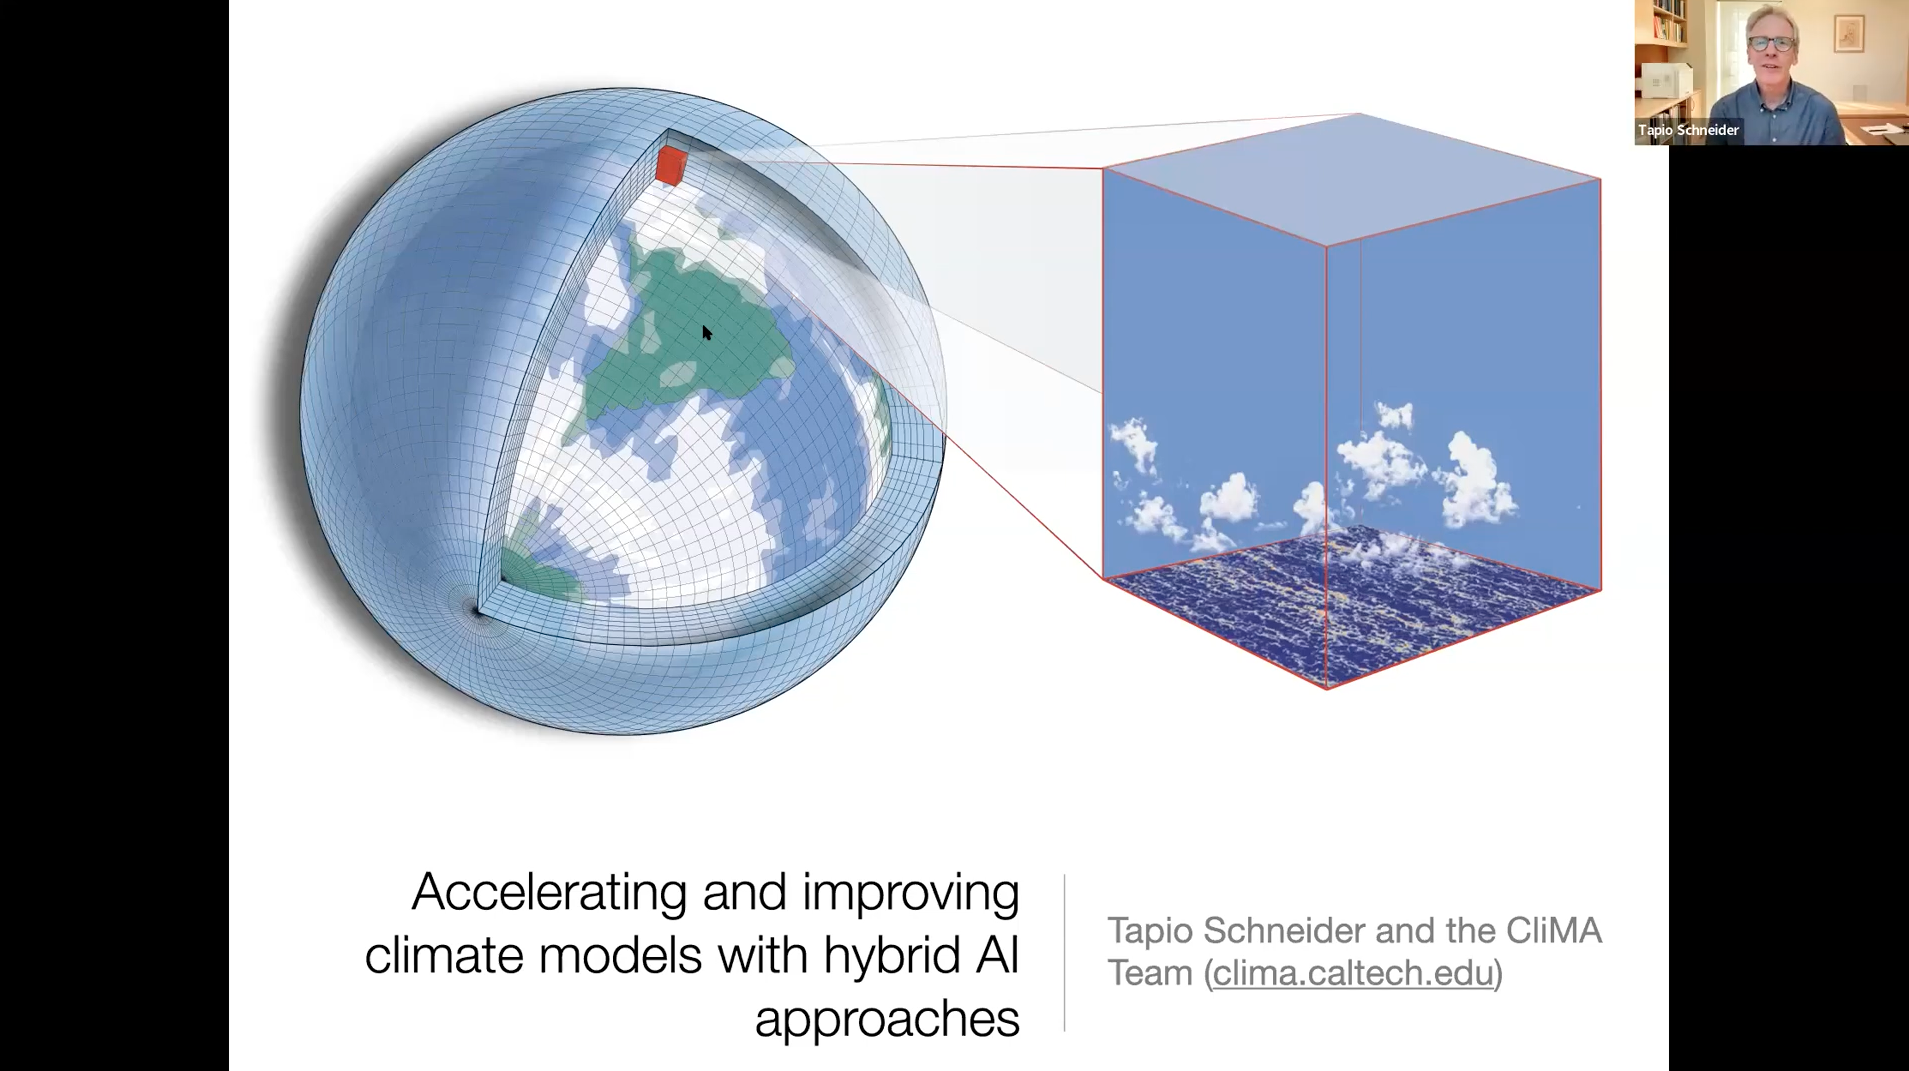 Accelerating and improving climate models with hybrid AI approaches: Tapio Schneider